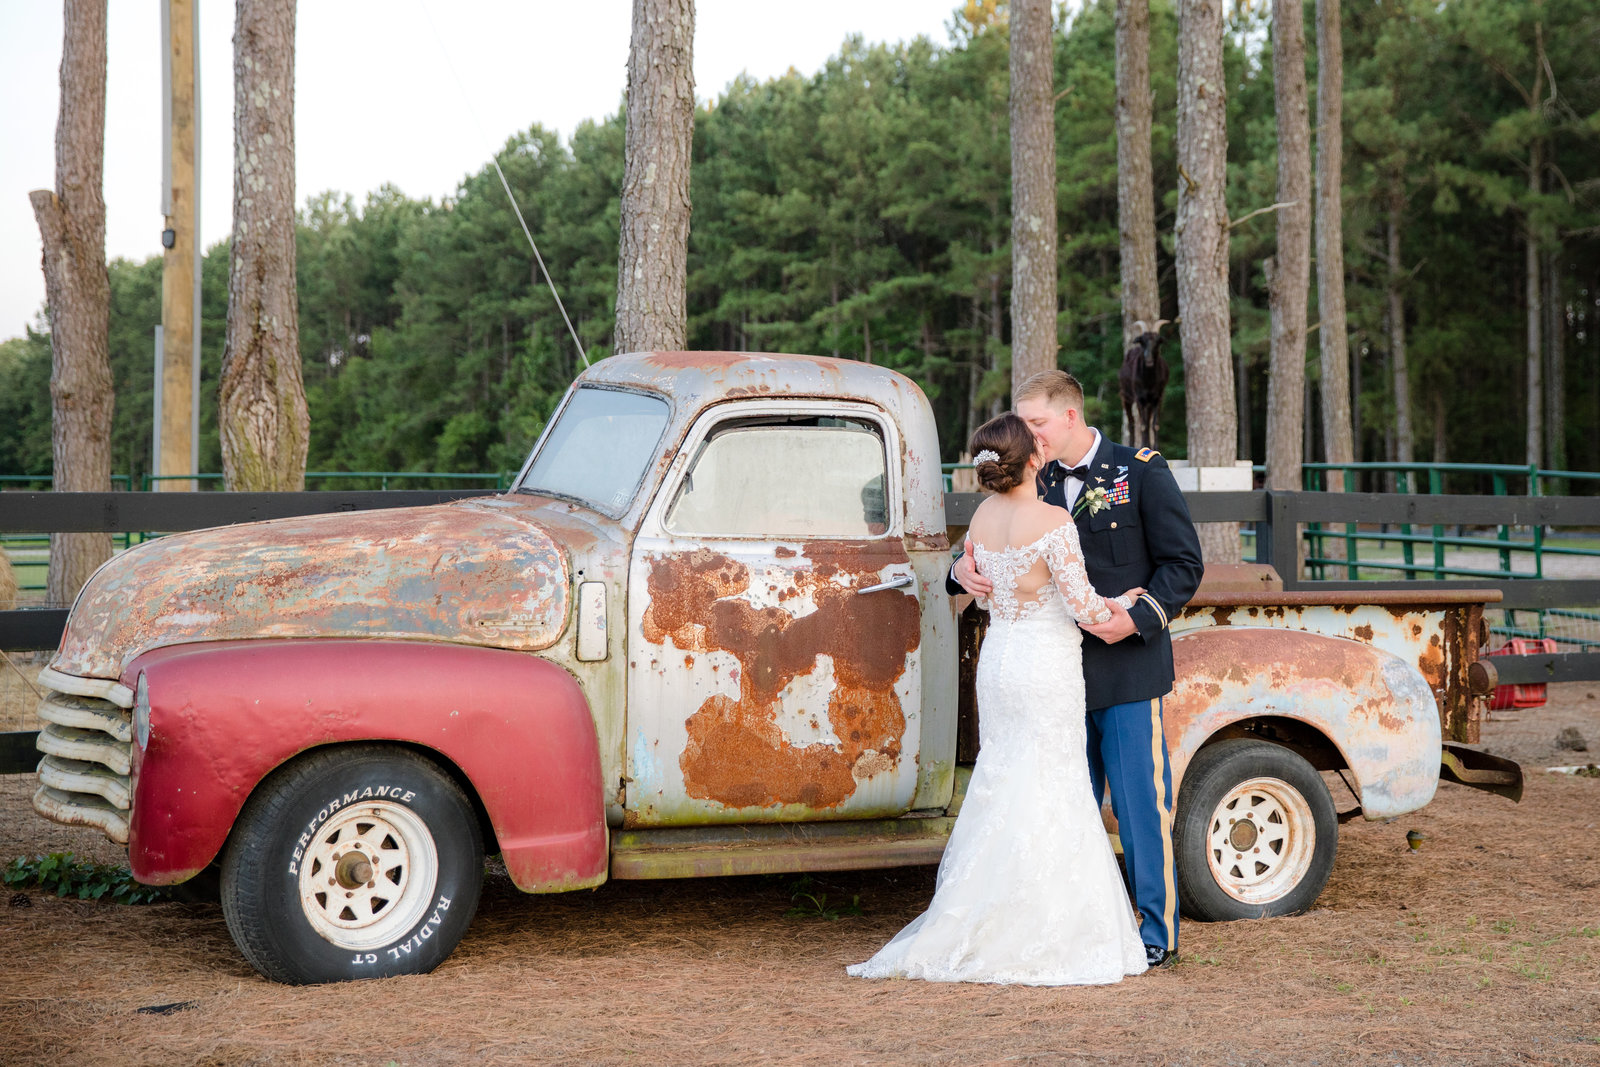 Photography by Tiffany - Fayetteville NC Wedding and Family Photographer - Apex  - Southern Pines - Pinehurst - Painted Pony Wedding - June 15, 2019 - 12